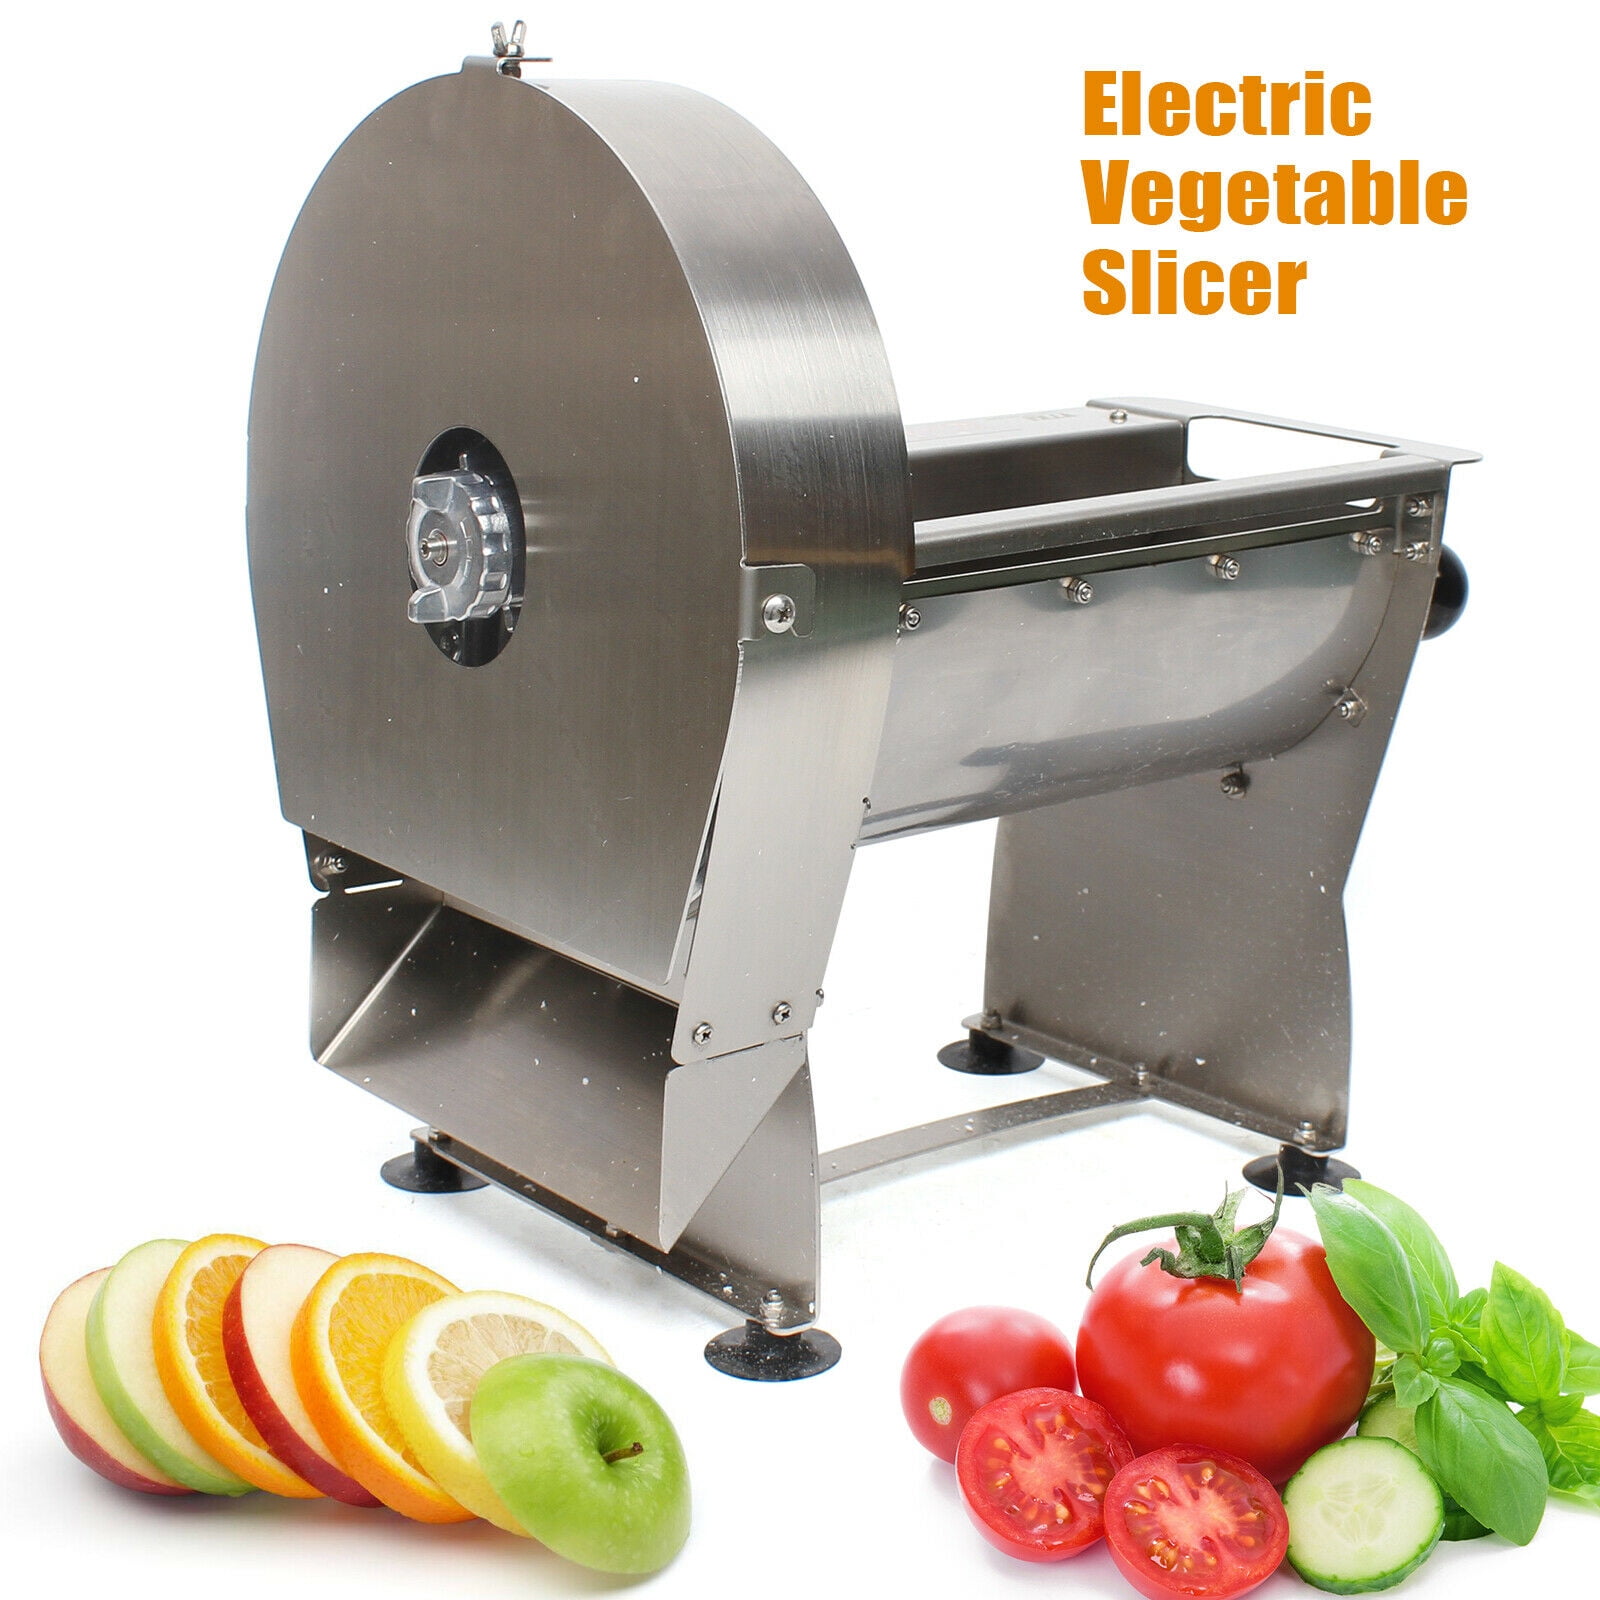 Exceptional fruit and vegetable shredder machine At Unbeatable